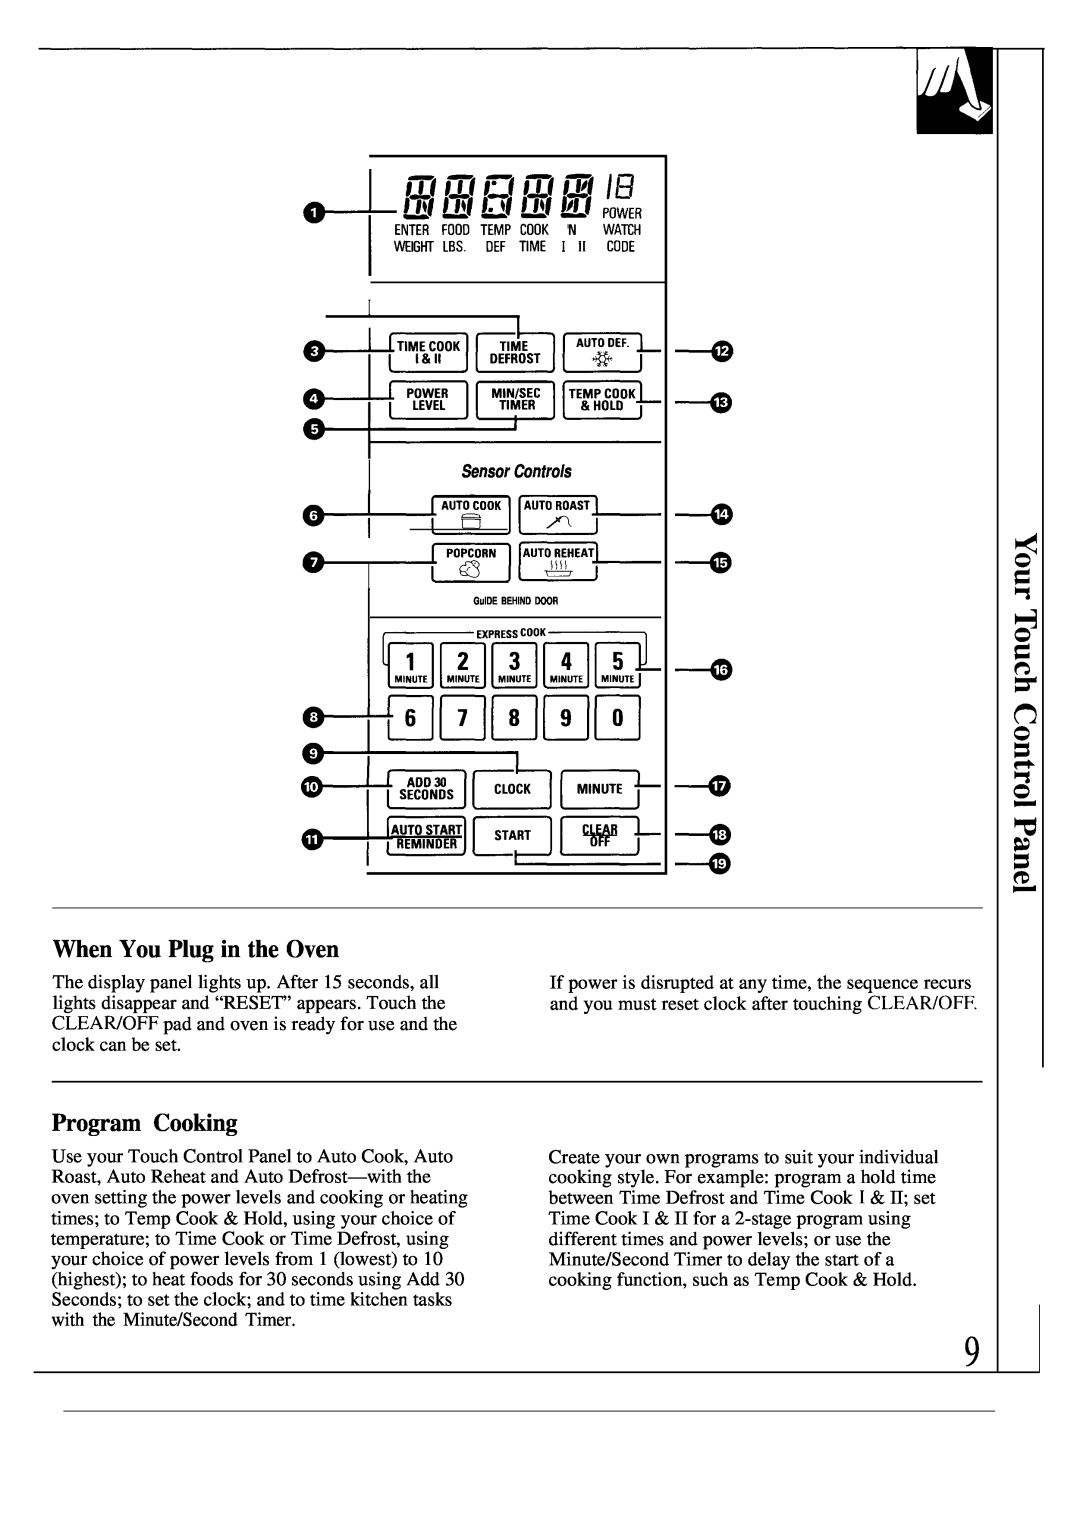 GE JE1468L operating instructions I+poHRNl, When You Plug in the Oven, Program Cooking 